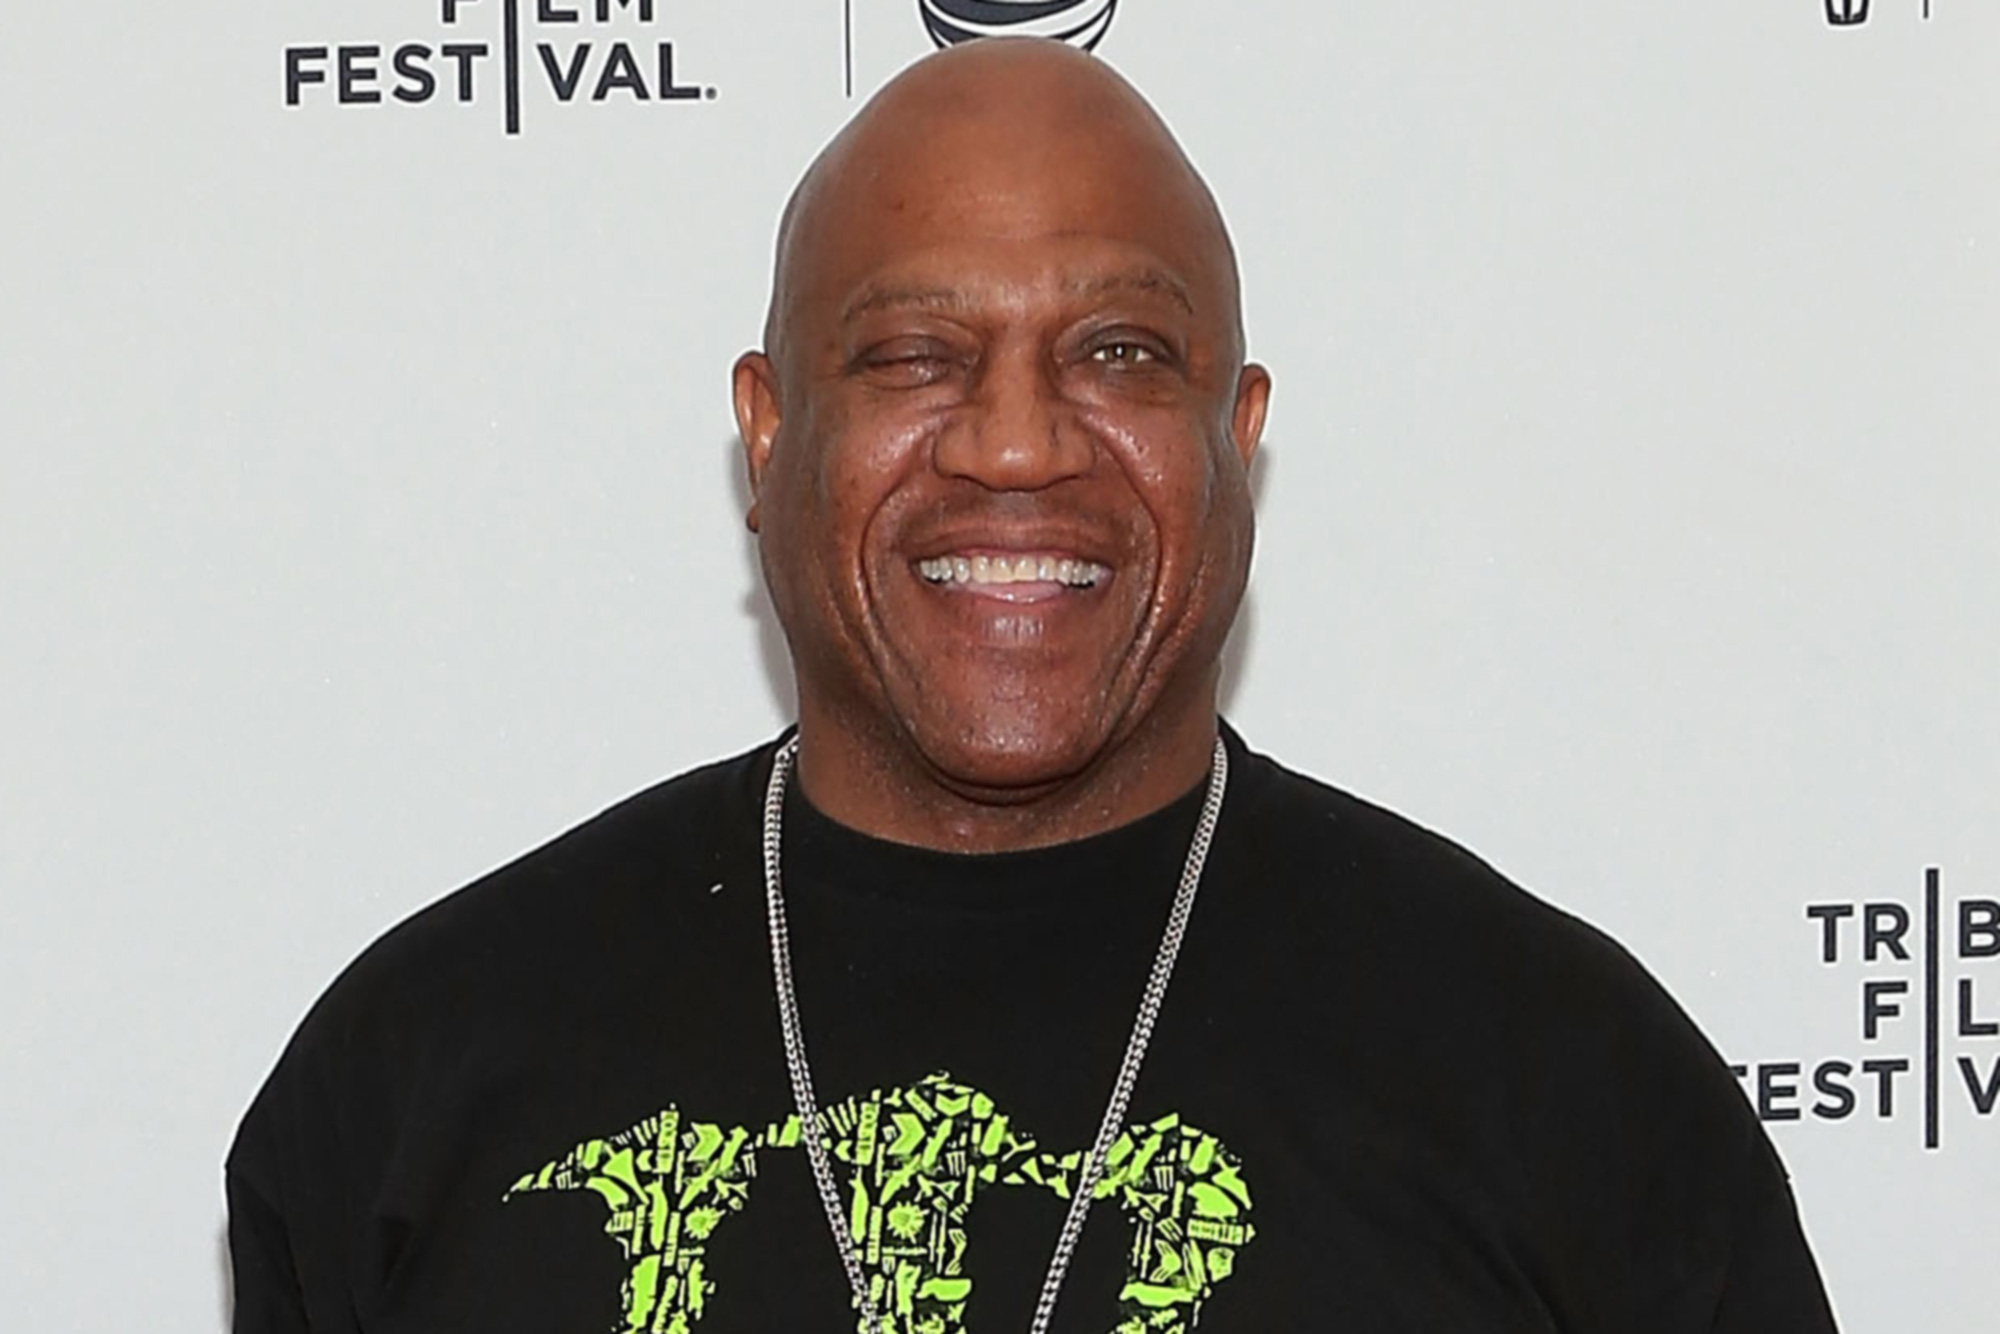 'Tiny' Lister, longtime character actor, dead at 62